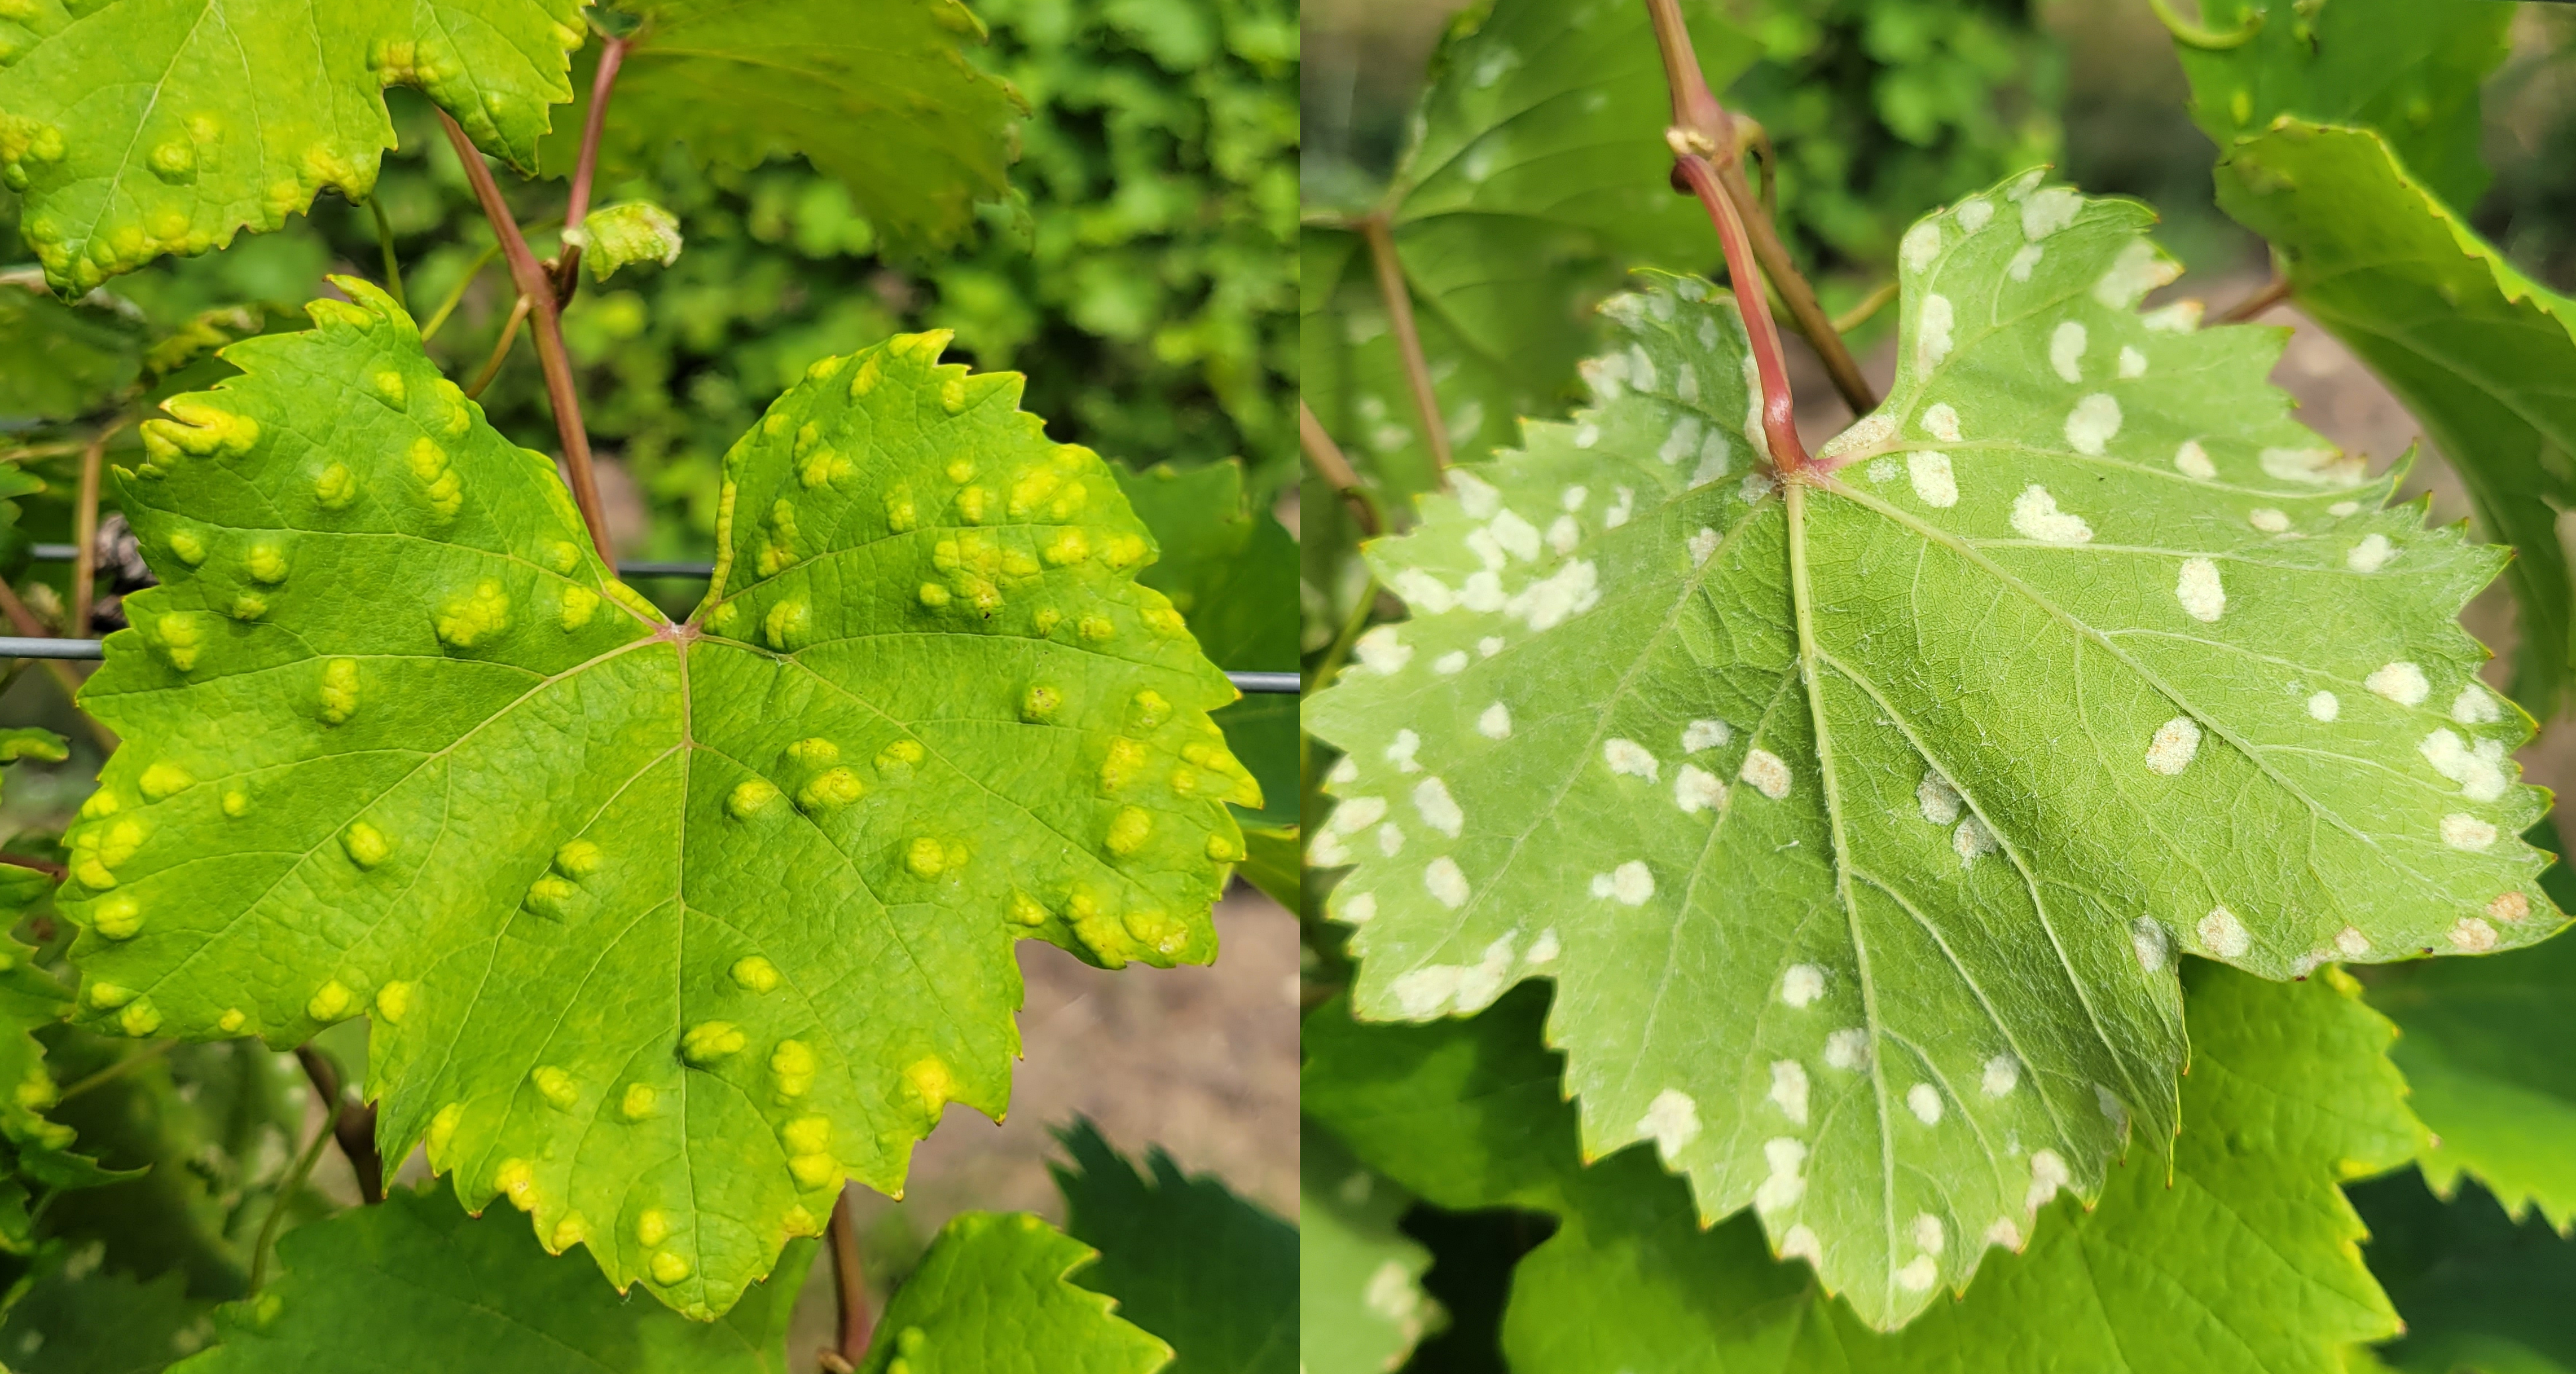 Grape leaves with spots on them.